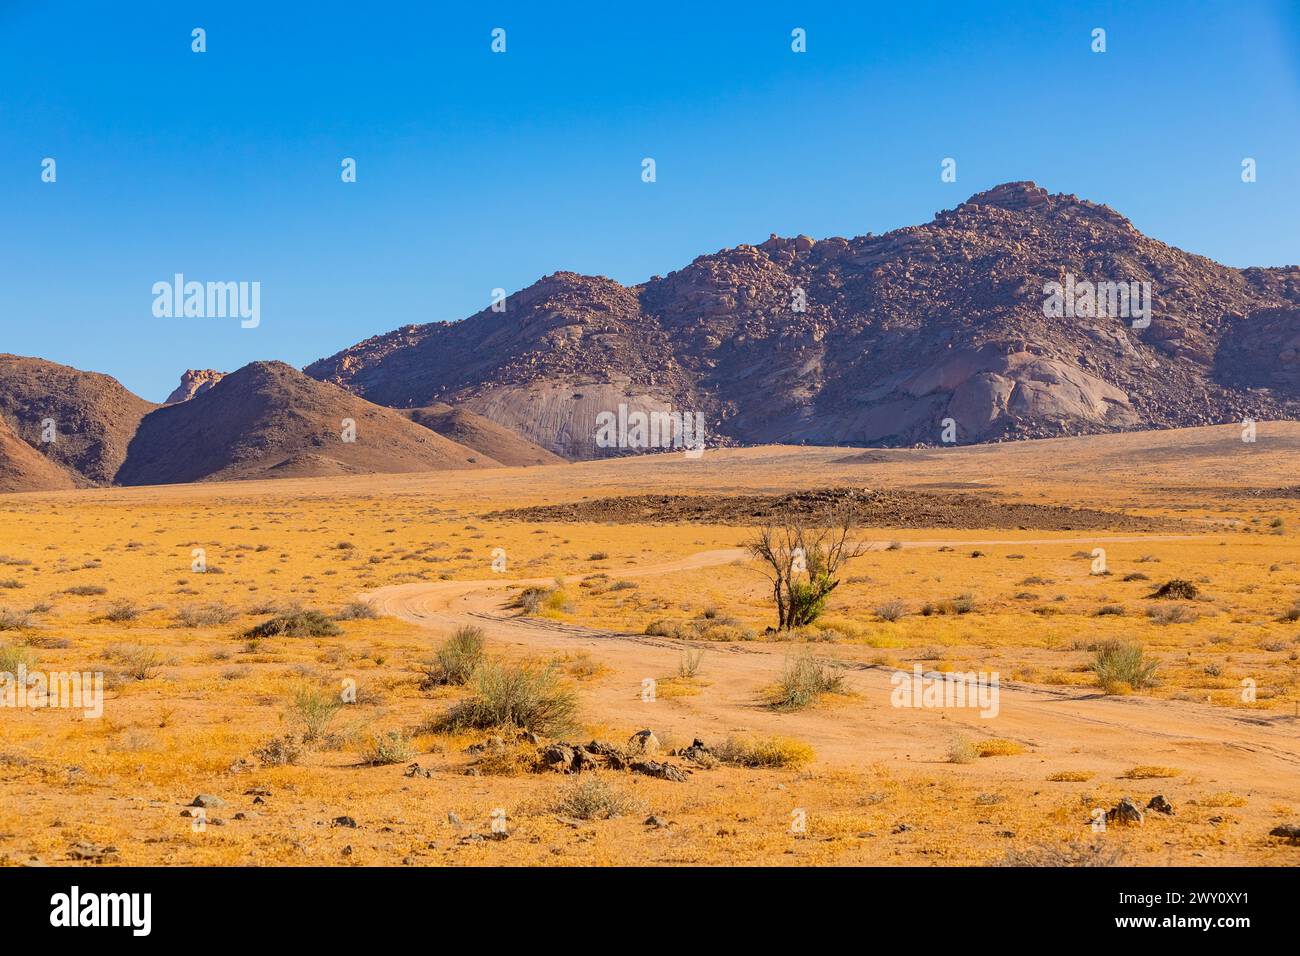 Wide open area in the Richtersveld National Park, arid area of South Africa Stock Photo